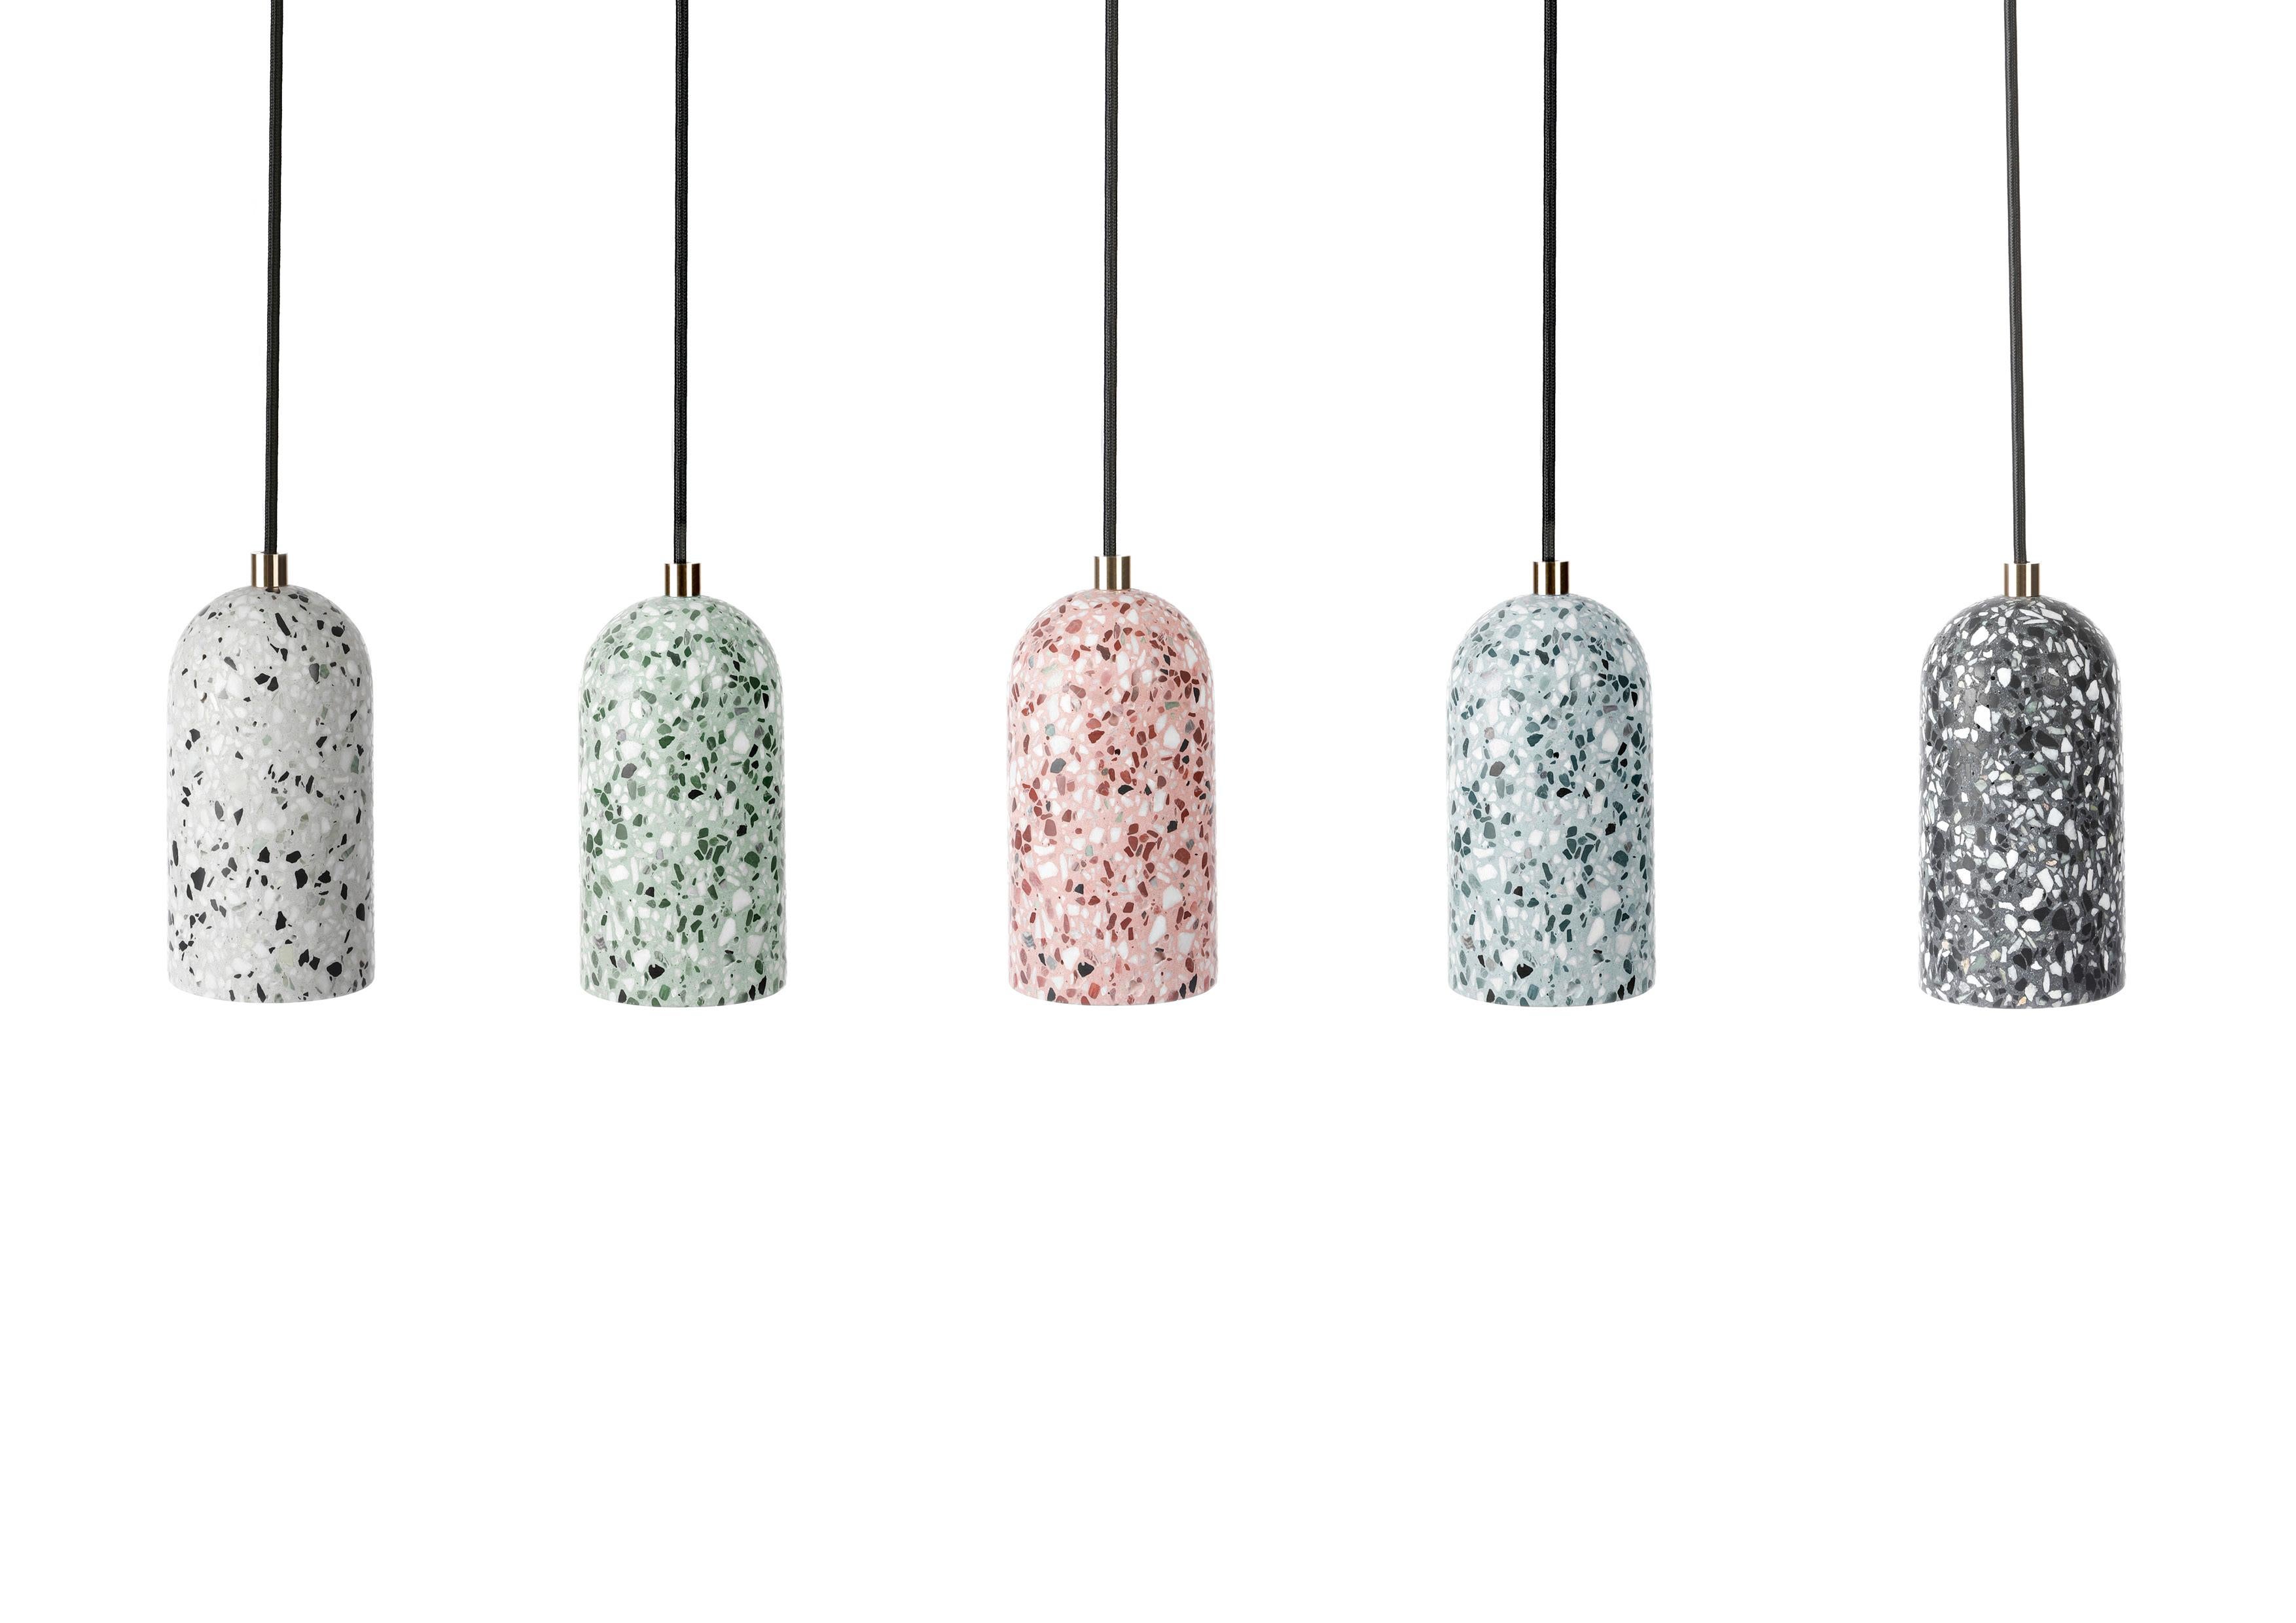 'U' terrazzo pendant lamp designed by Cantonese studio Bentu design

Light source: E27 LED 3W 100-240V 80Ra 200LM 3000K
Measures: H 18.5 cm x D 9.6 cm.

These pendant lamps are available in different colors of terrazzo: white, black, red, sky blue,